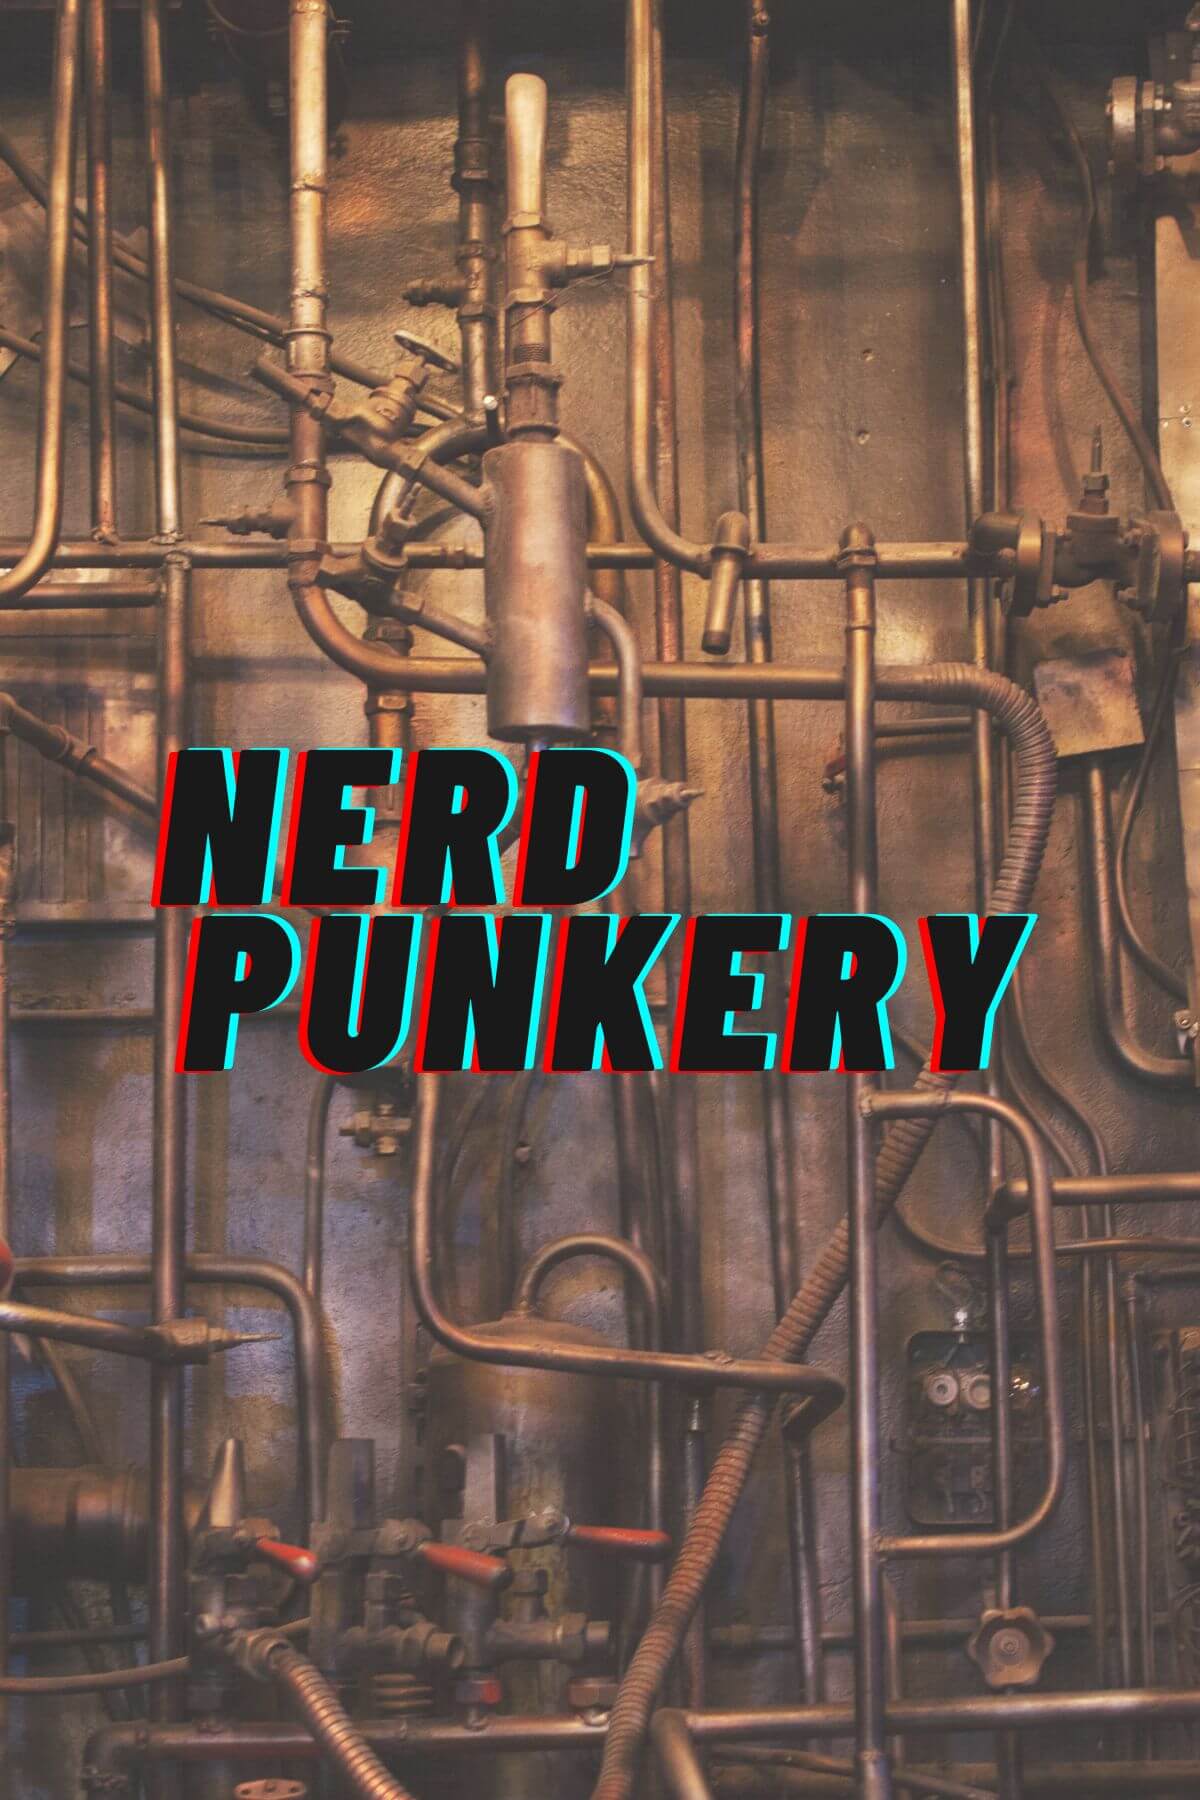 Nerd Punkery Logo in front of pipes